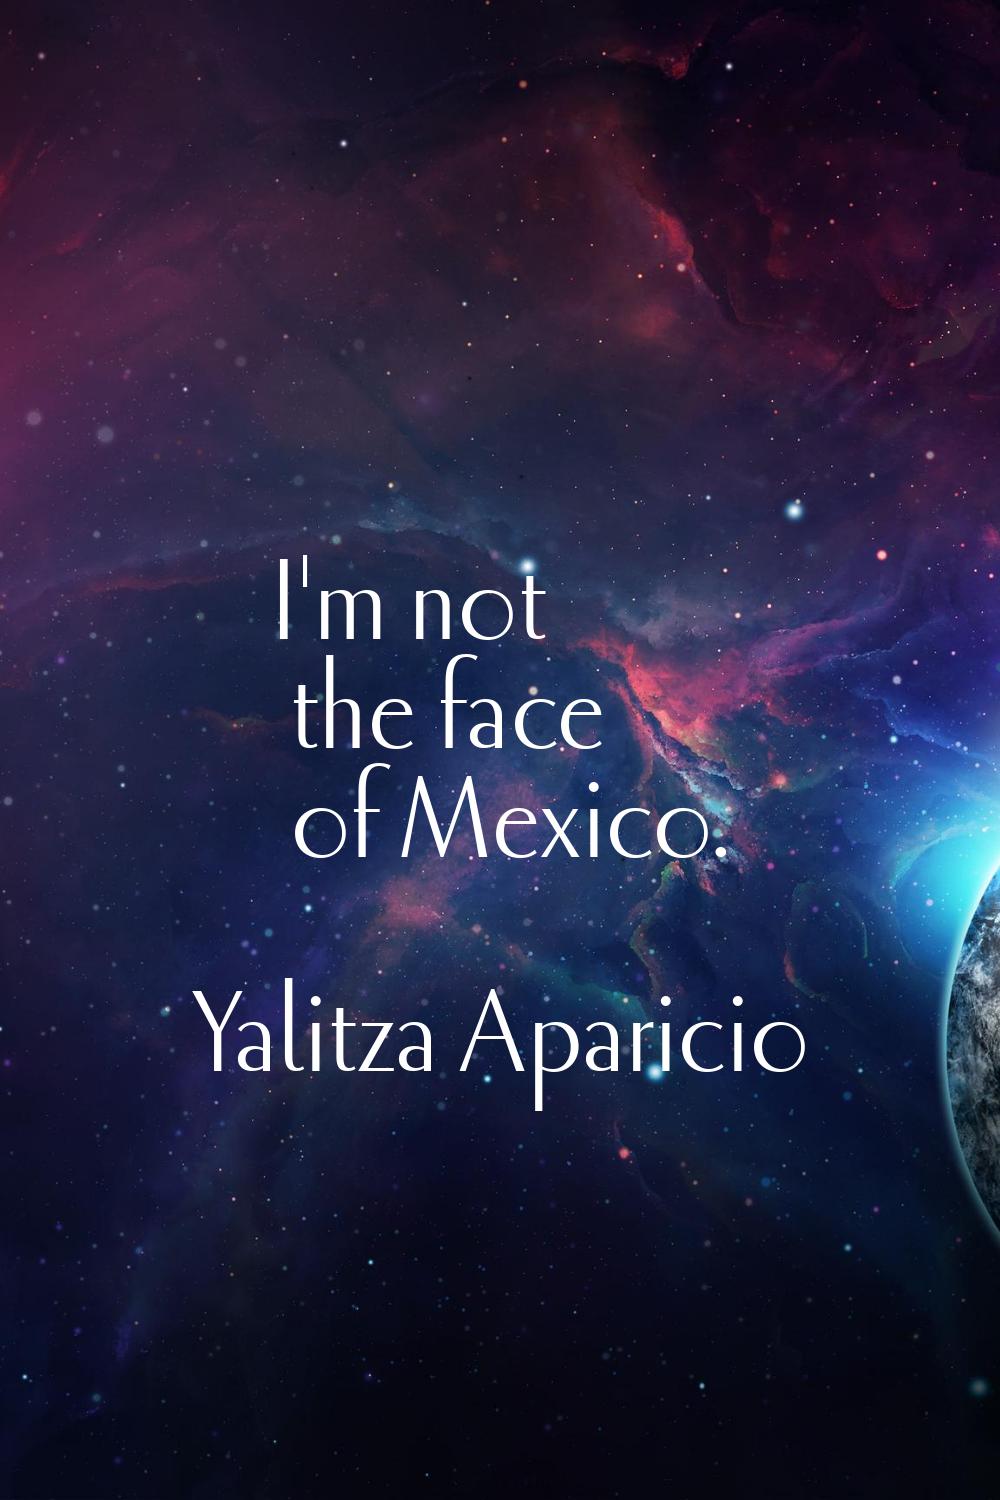 I'm not the face of Mexico.